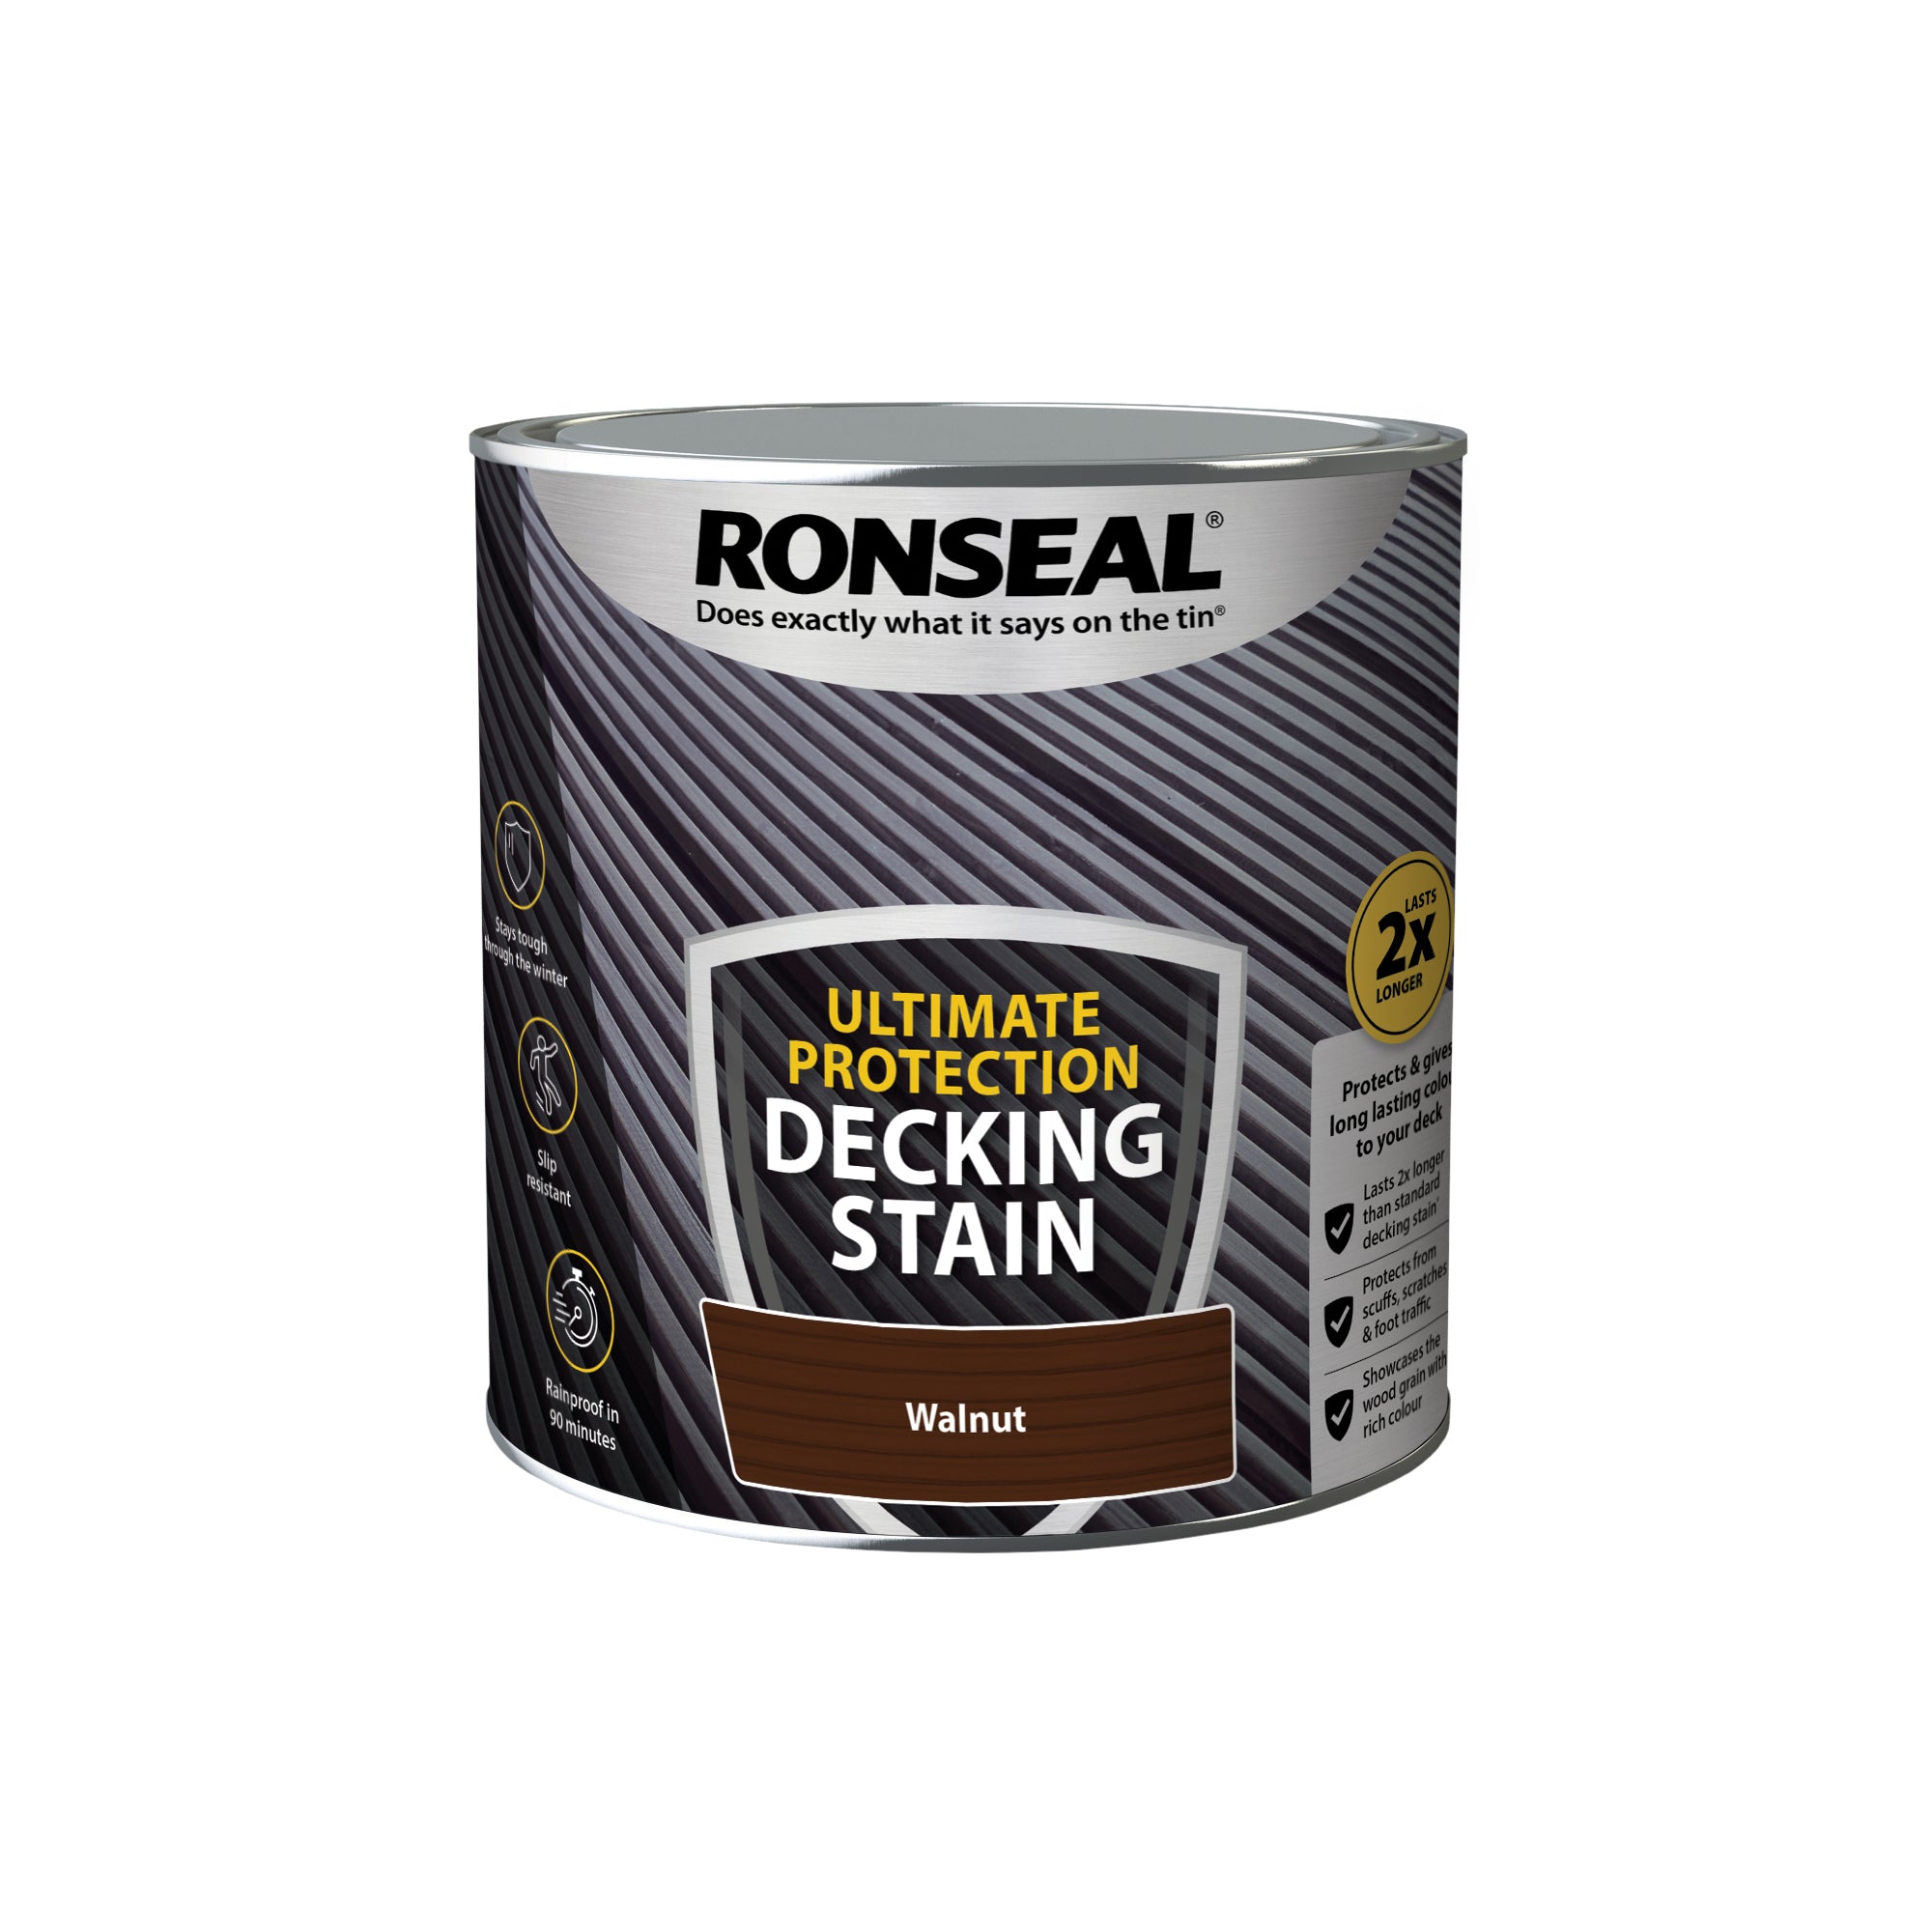 Ronseal-Ultimate-Protection-Decking-Stain-Walnut-2.5L